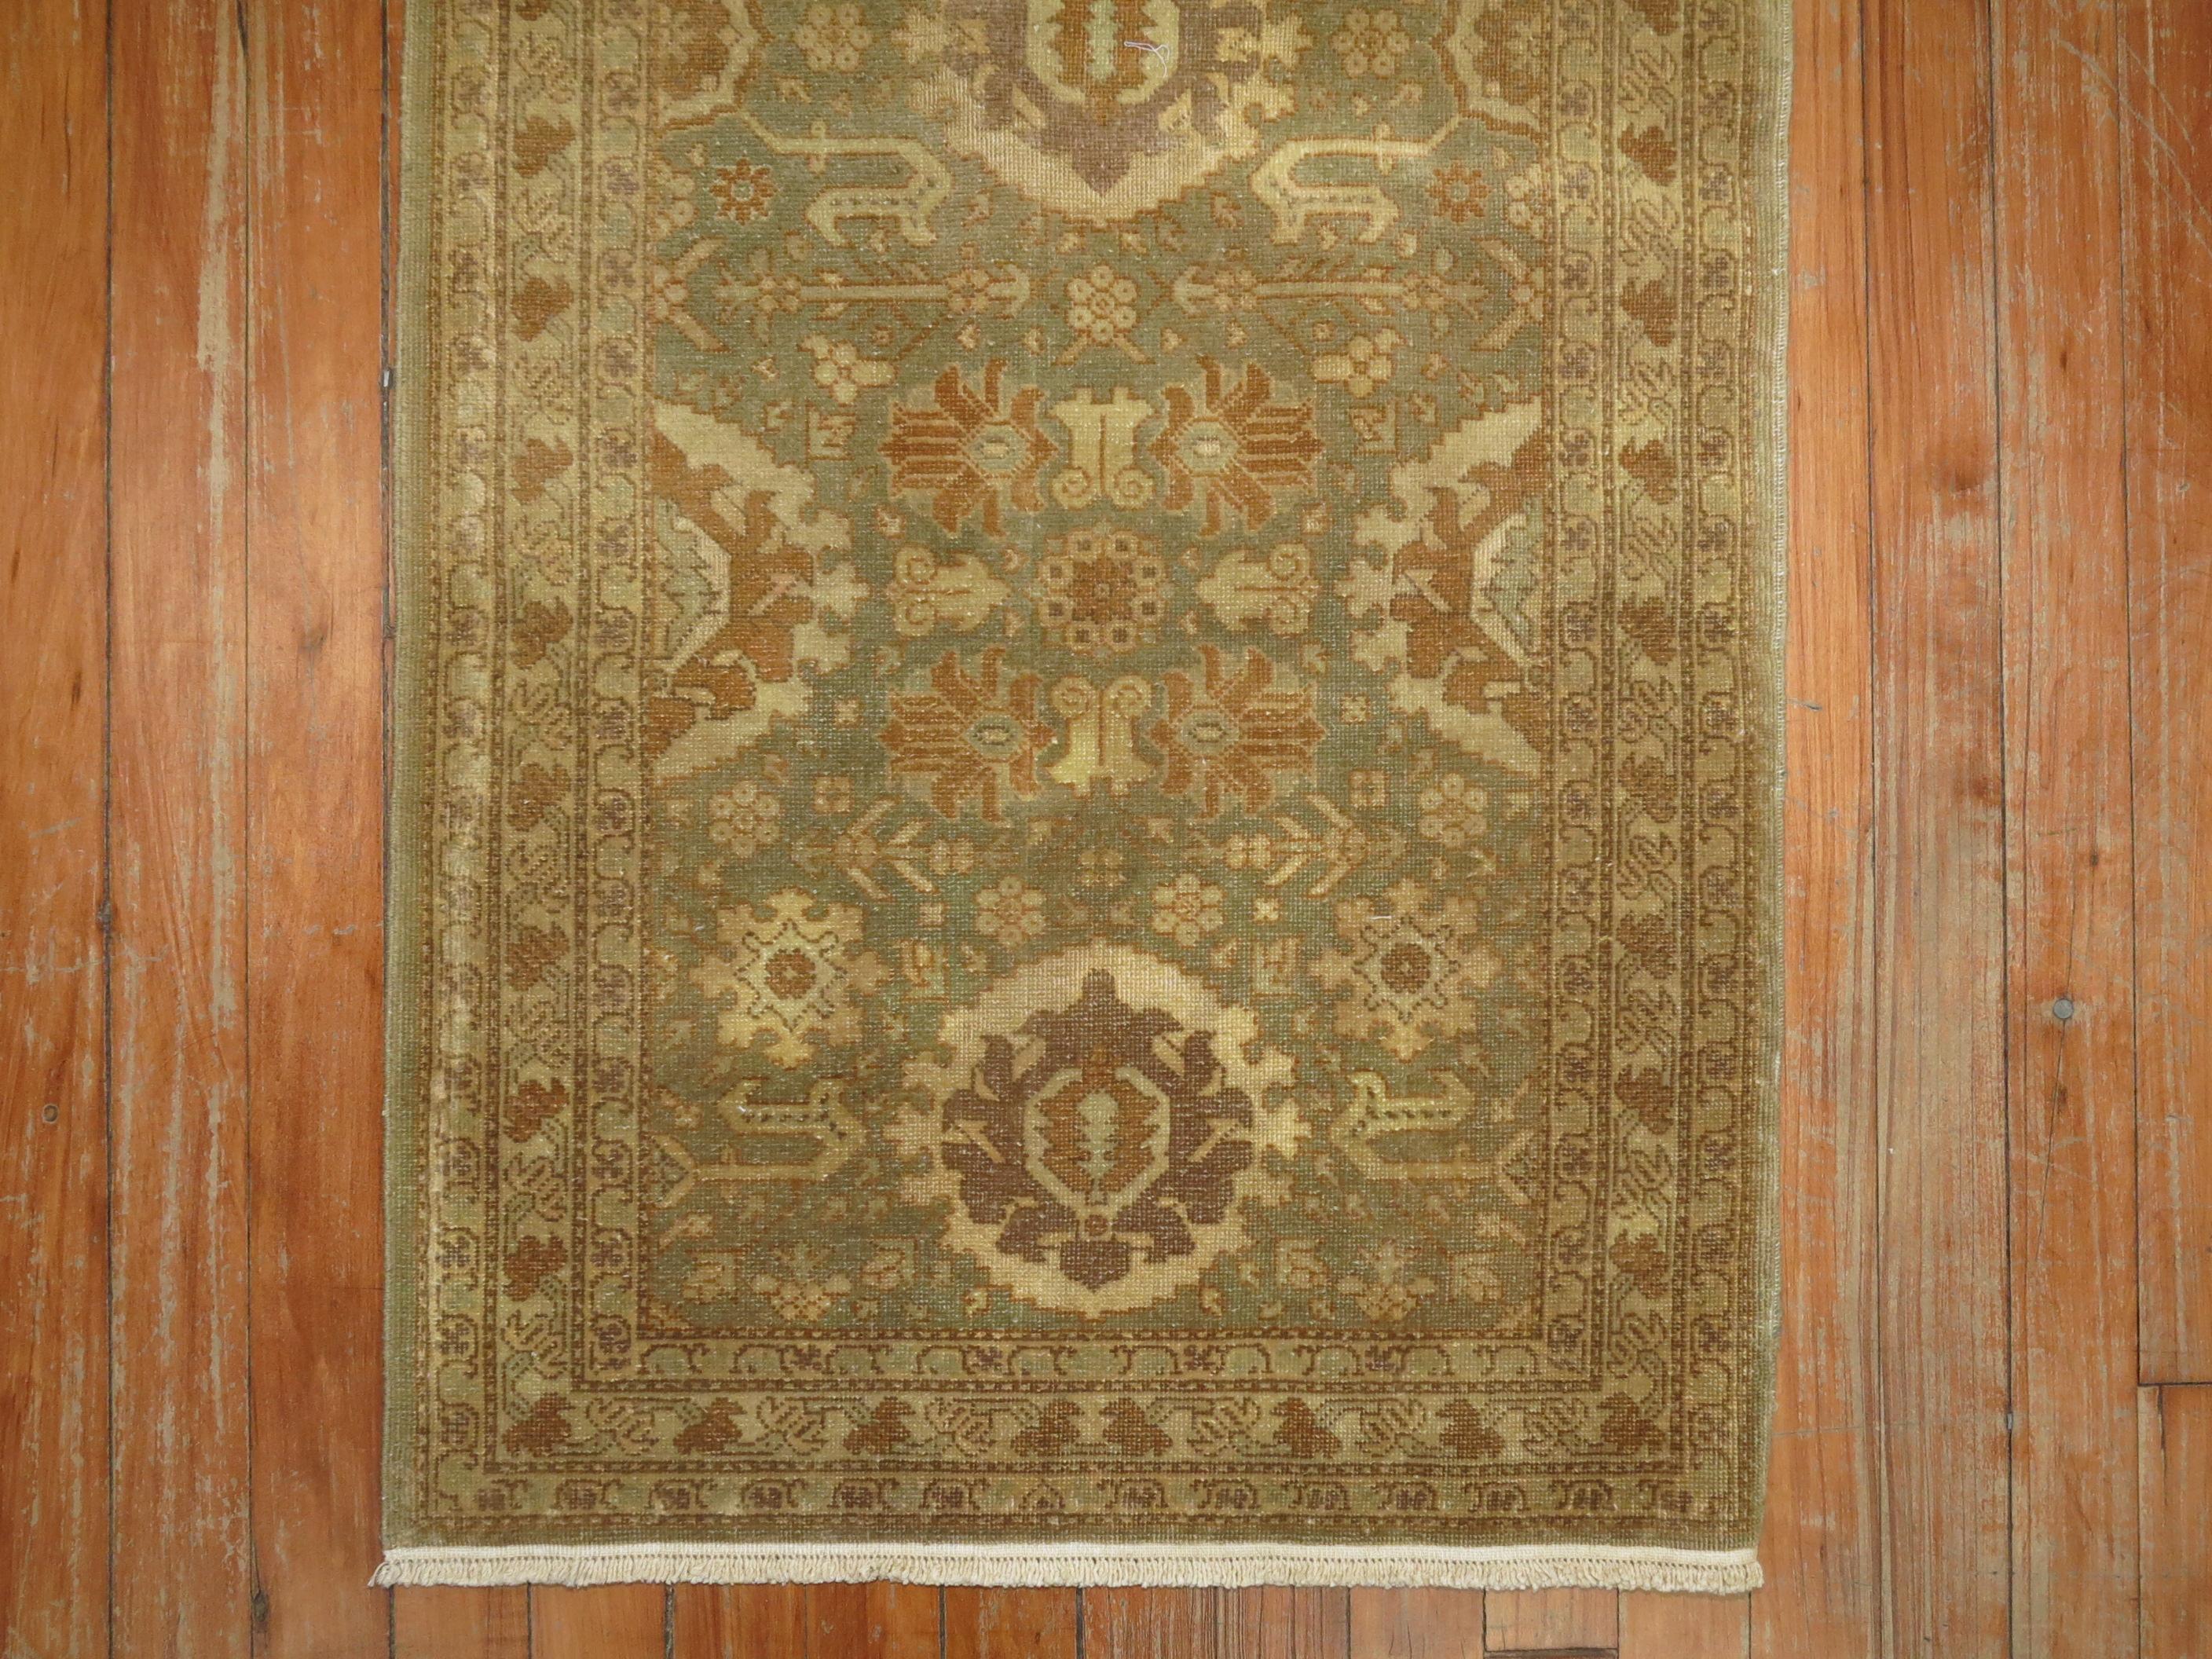 Rare small Persian Tabriz rug in green, brown, and gold hues from the middle of the 20th century.

Measures: 2' x 4'3''.